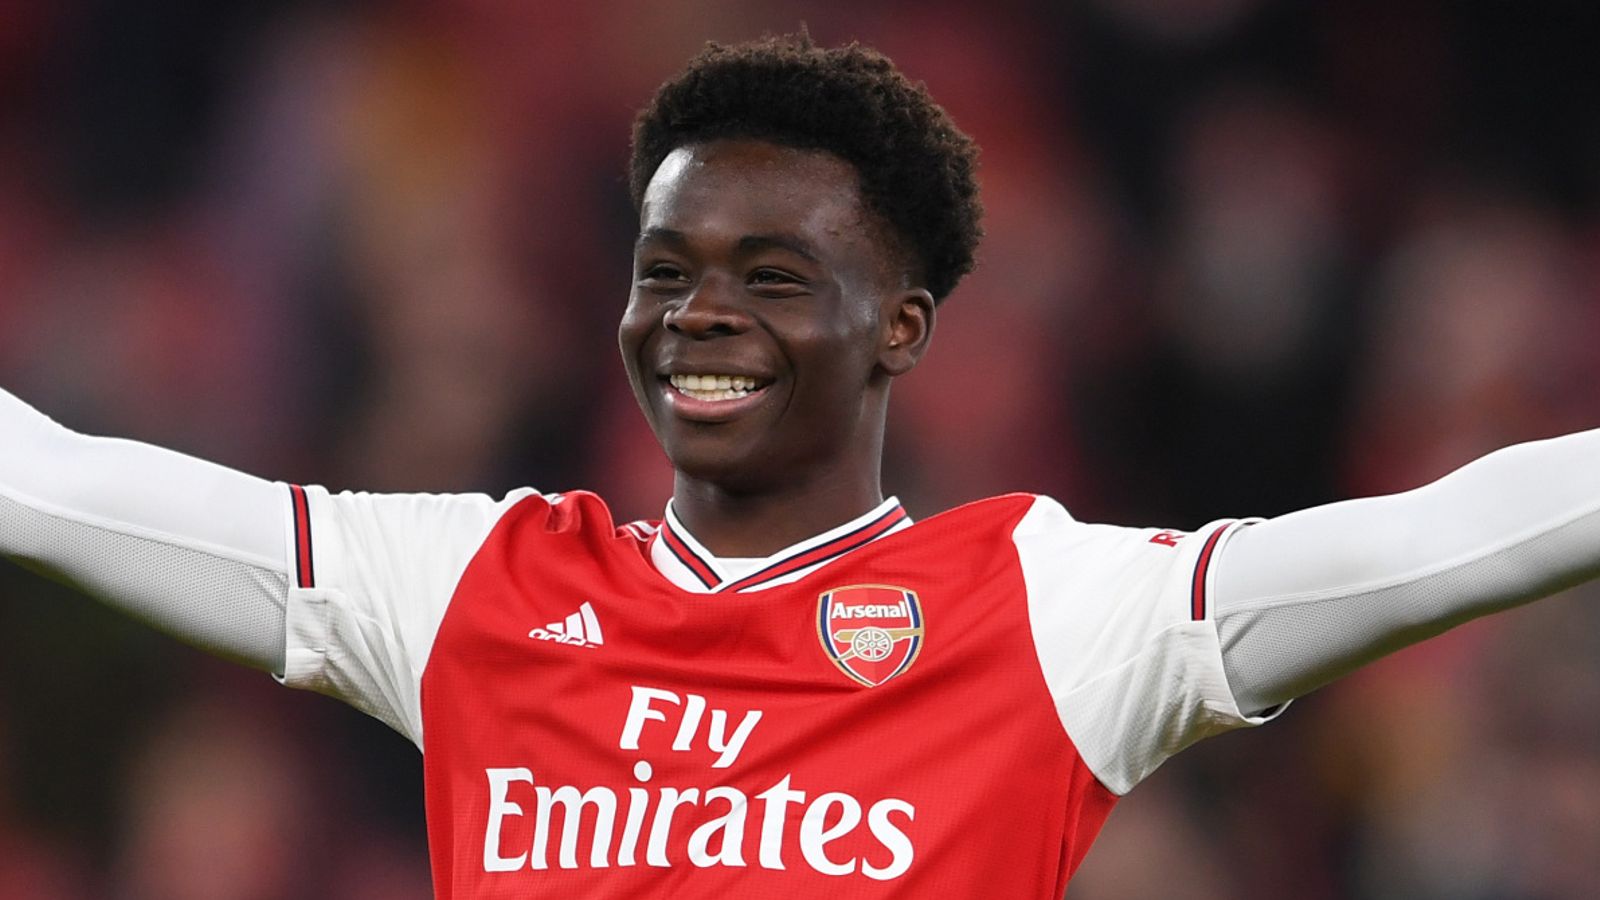 The 21-year old son of father (?) and mother(?) Bukayo Saka in 2023 photo. Bukayo Saka earned a 0.45 million dollar salary - leaving the net worth at  million in 2023